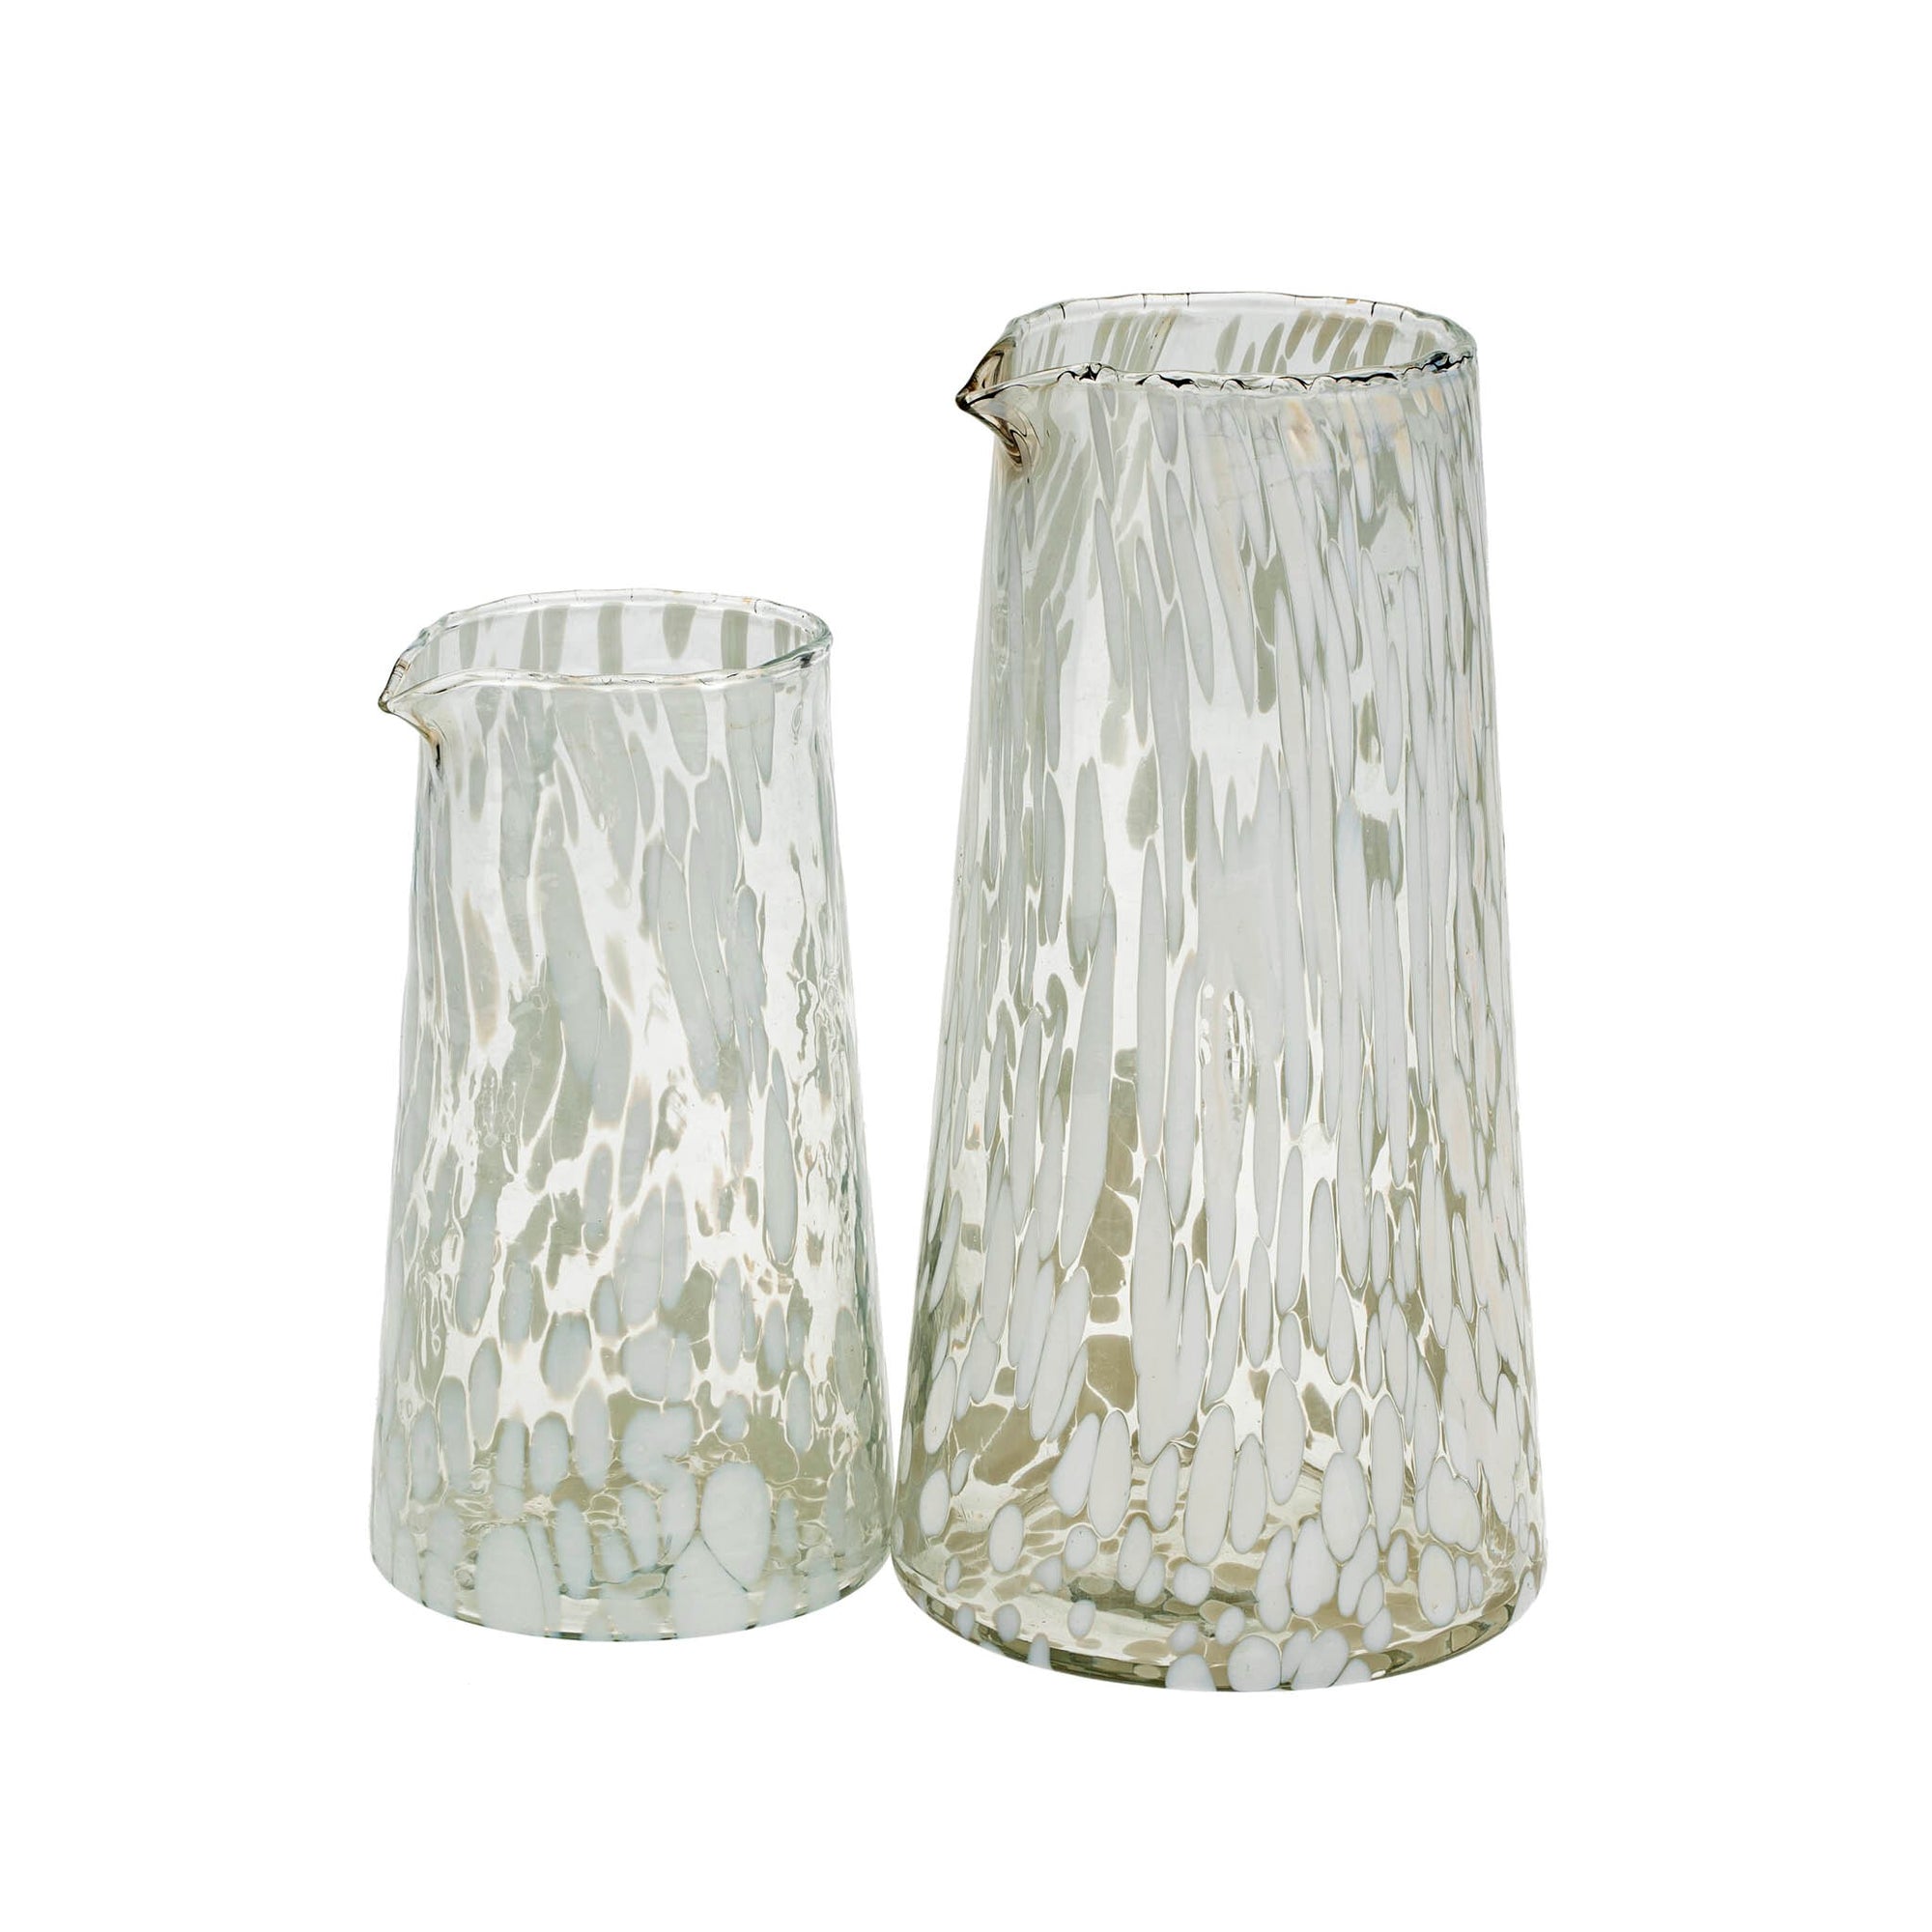 Complementary small and large confetti patterned hand blown glass vases. Artisan goods. 